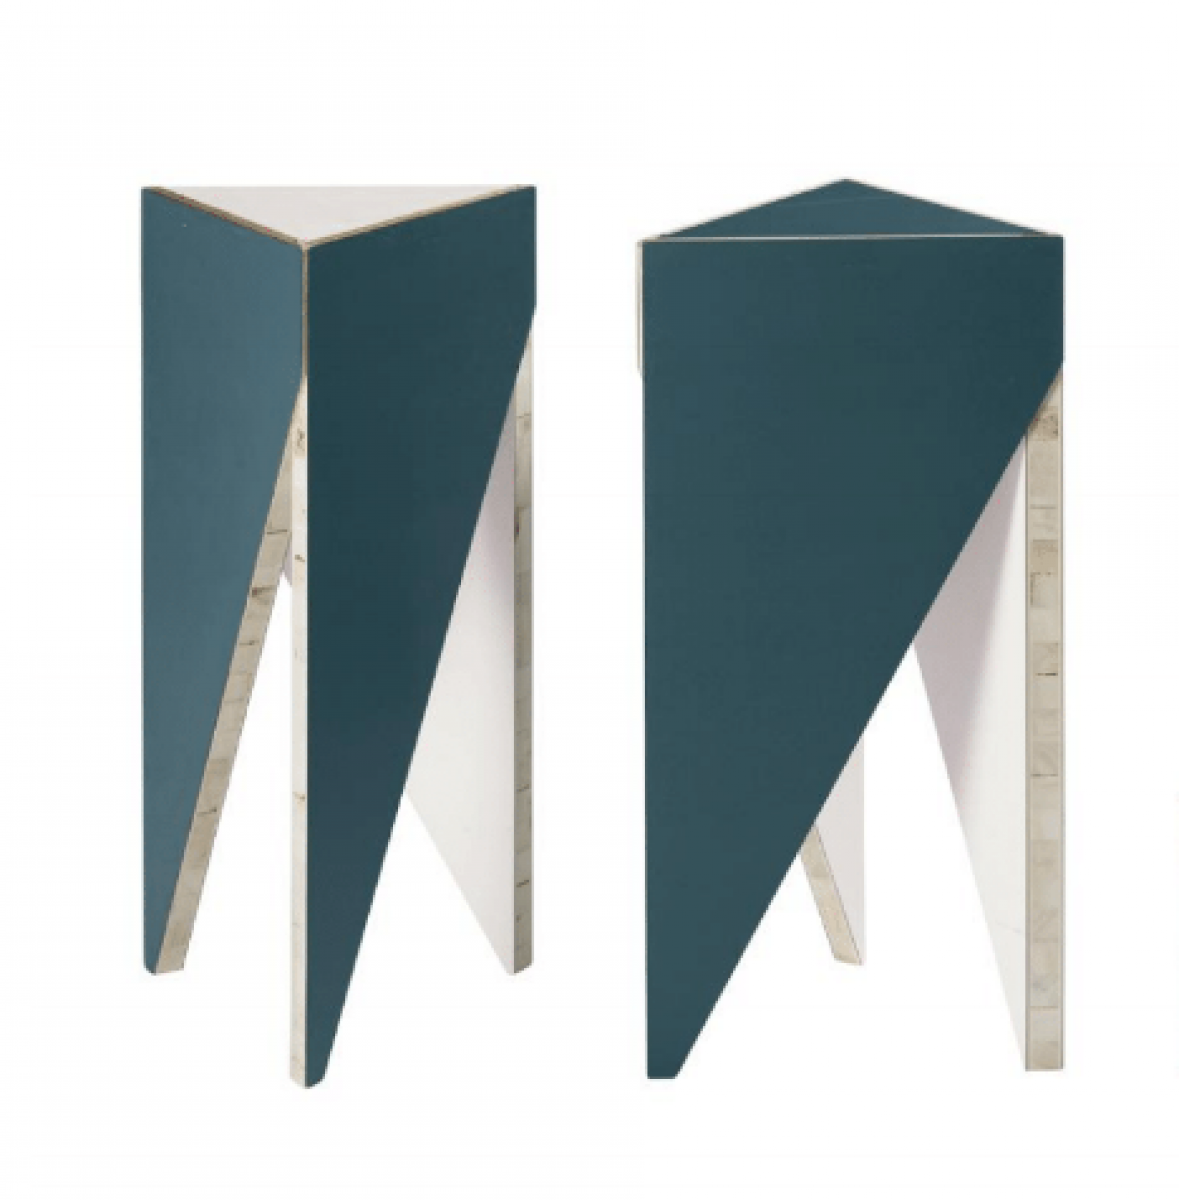 Two stools and one low table Martino Gamper pic-1